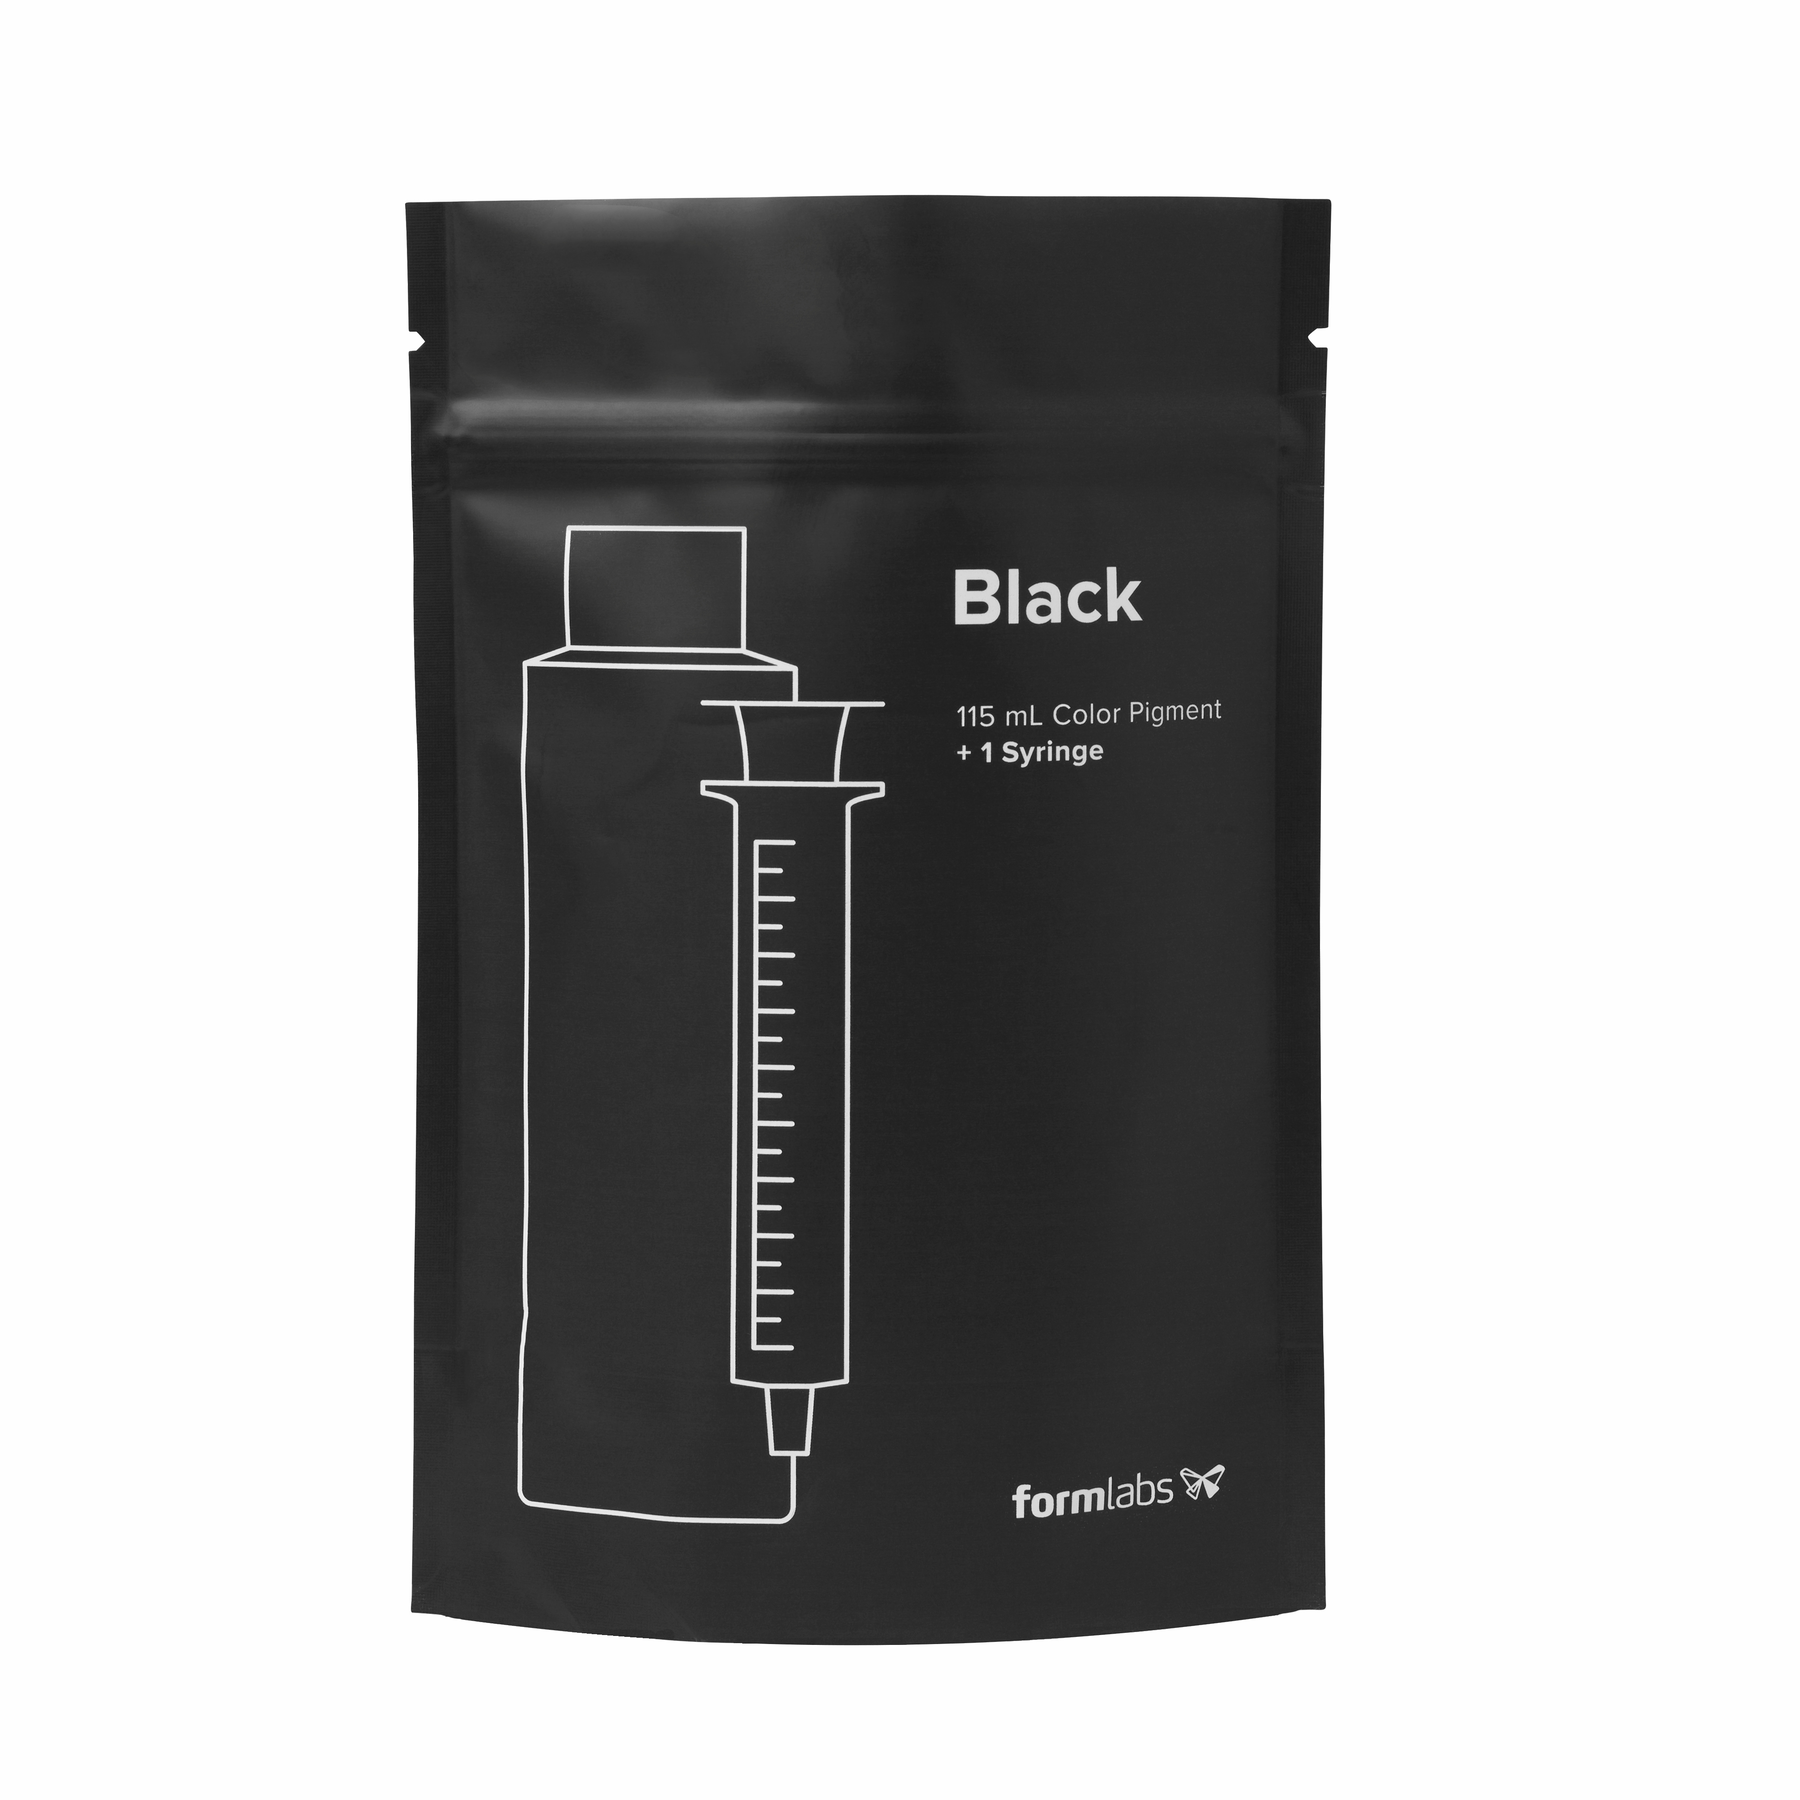 Black syringe. Shop additive manufacturing printers, resins and accessories | eacadditive.com.